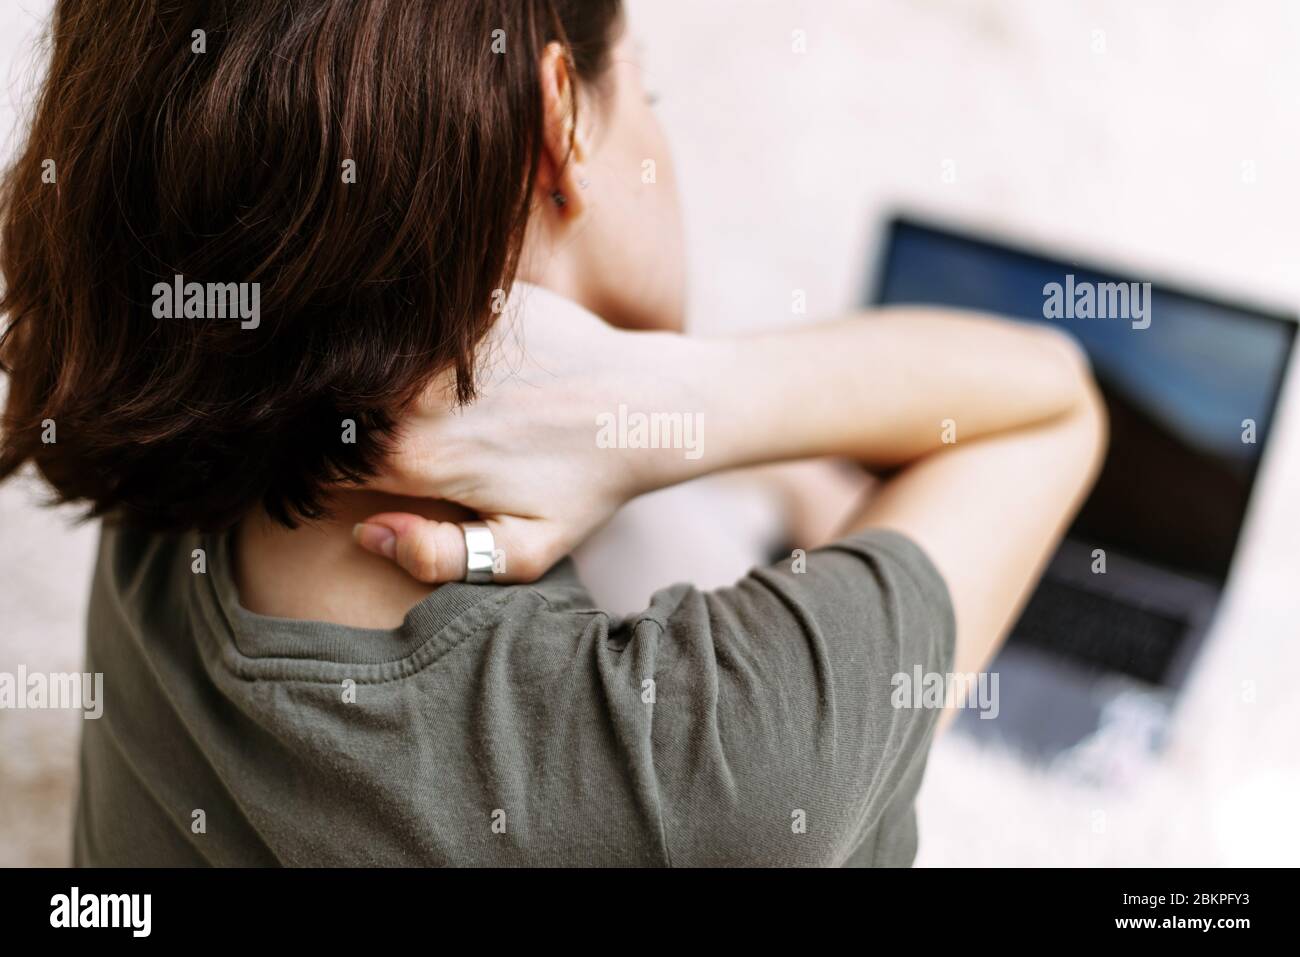 Tired woman massaging rubbing stiff sore neck tensed muscles fatigued from computer work in incorrect posture feeling hurt joint shoulder back pain ache, fibromyalgia concept, close up rear view. Stock Photo